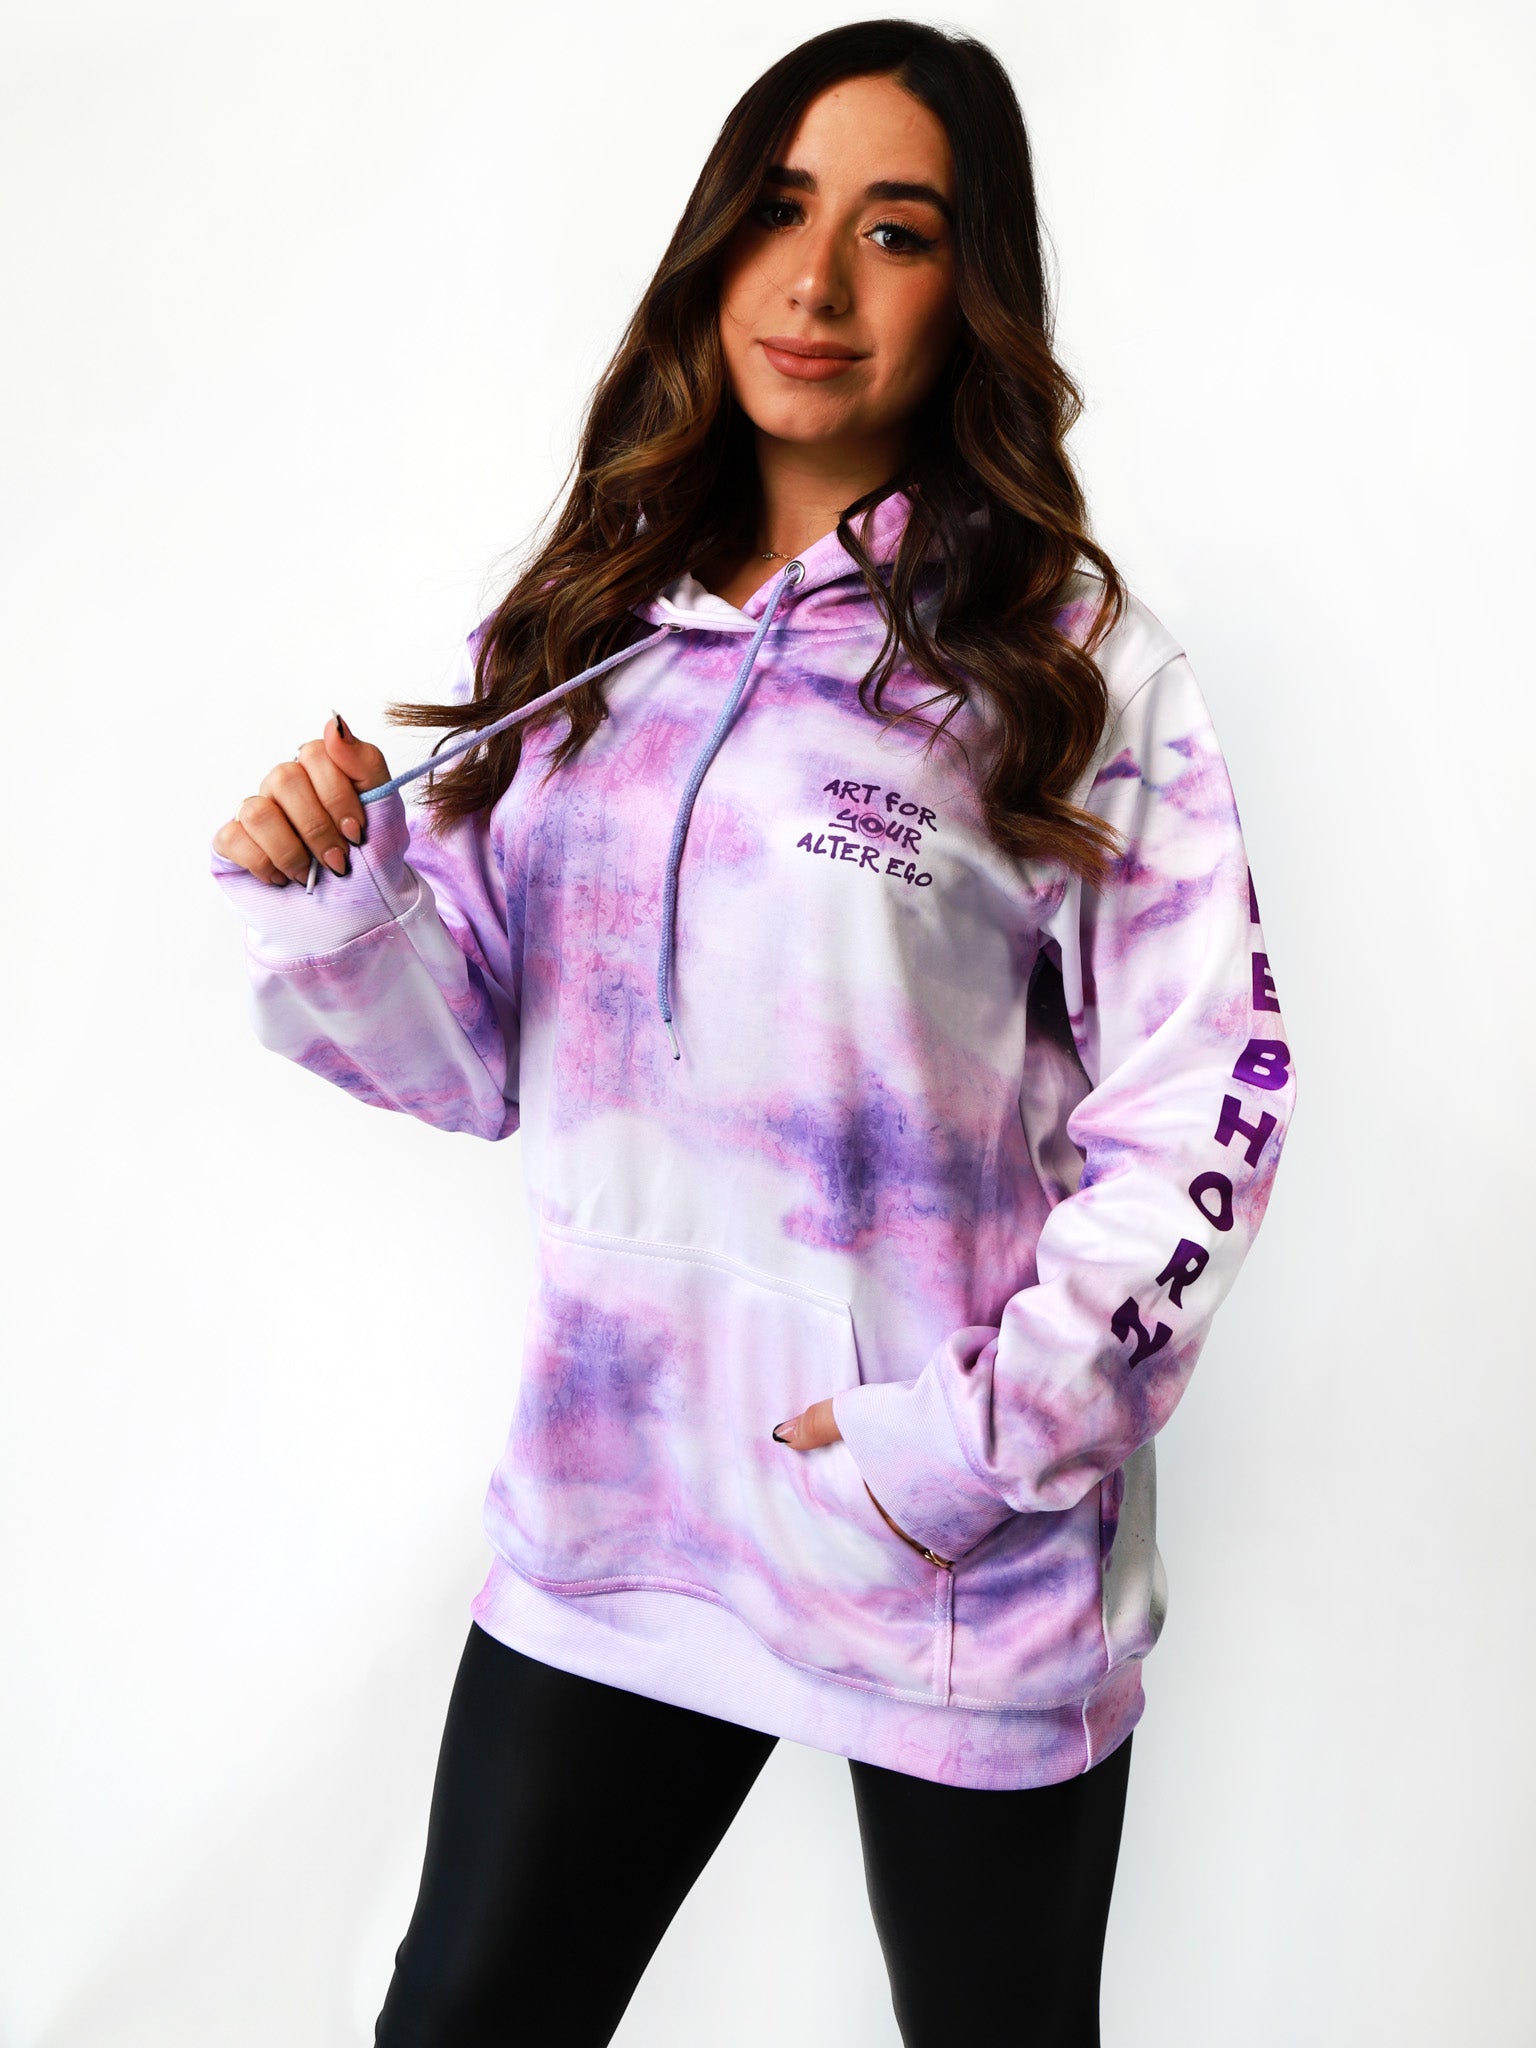 Claw Your Way Up Tie-Dye Pull-Over Hoodies - REBHORN DESIGN